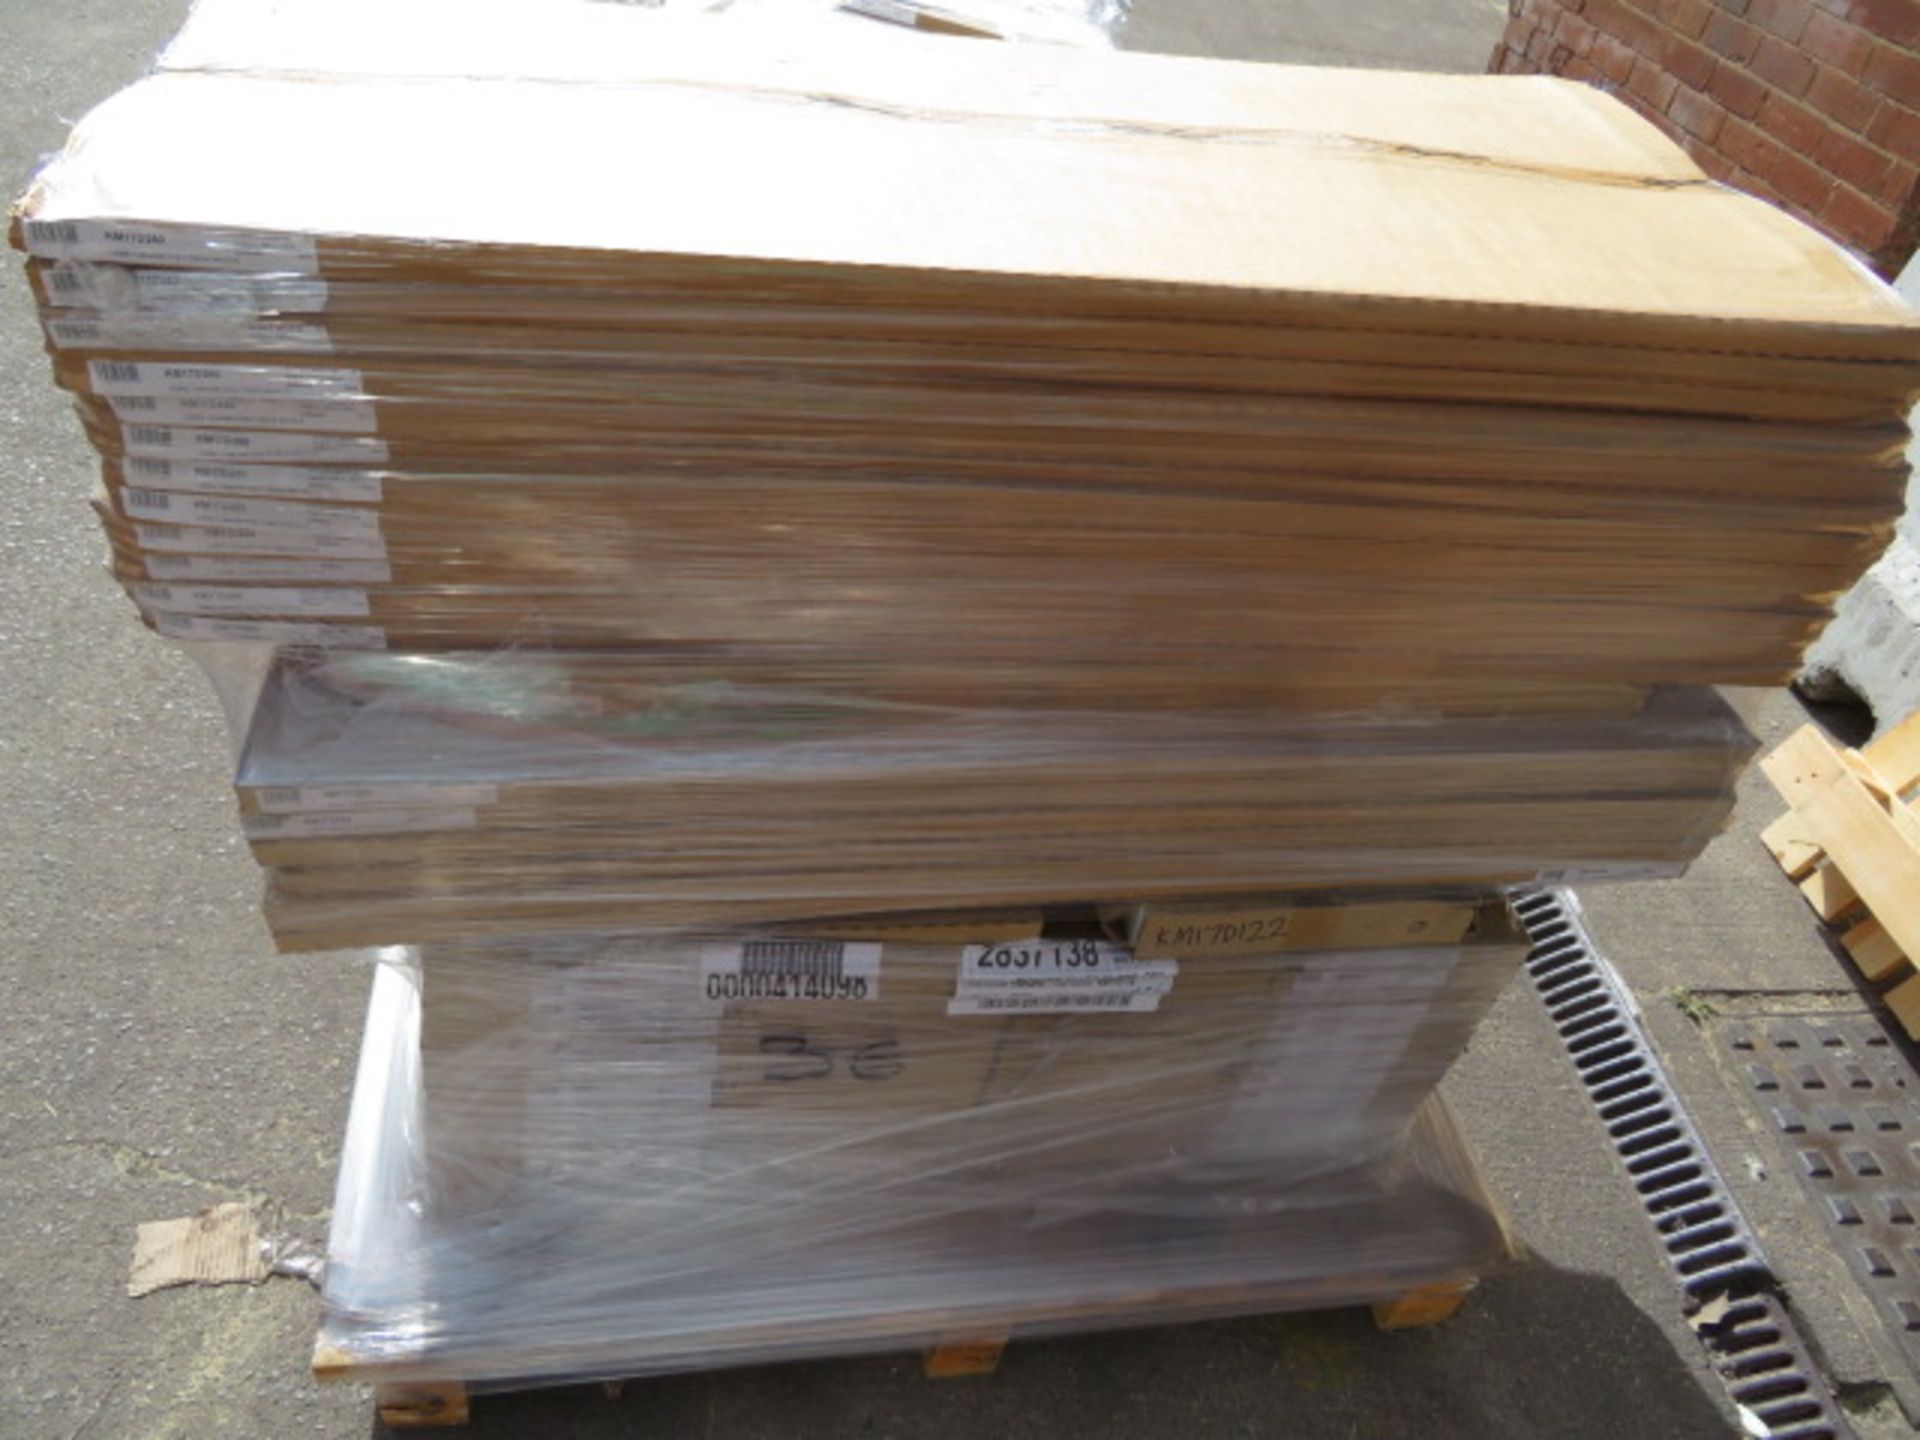 (ED53) PALLET TO CONTAIN 51 ITEMS OF NEW KITCHEN GOODS TO INCLUDE: VARIOUS DOORS, FACIAS IN HIGH